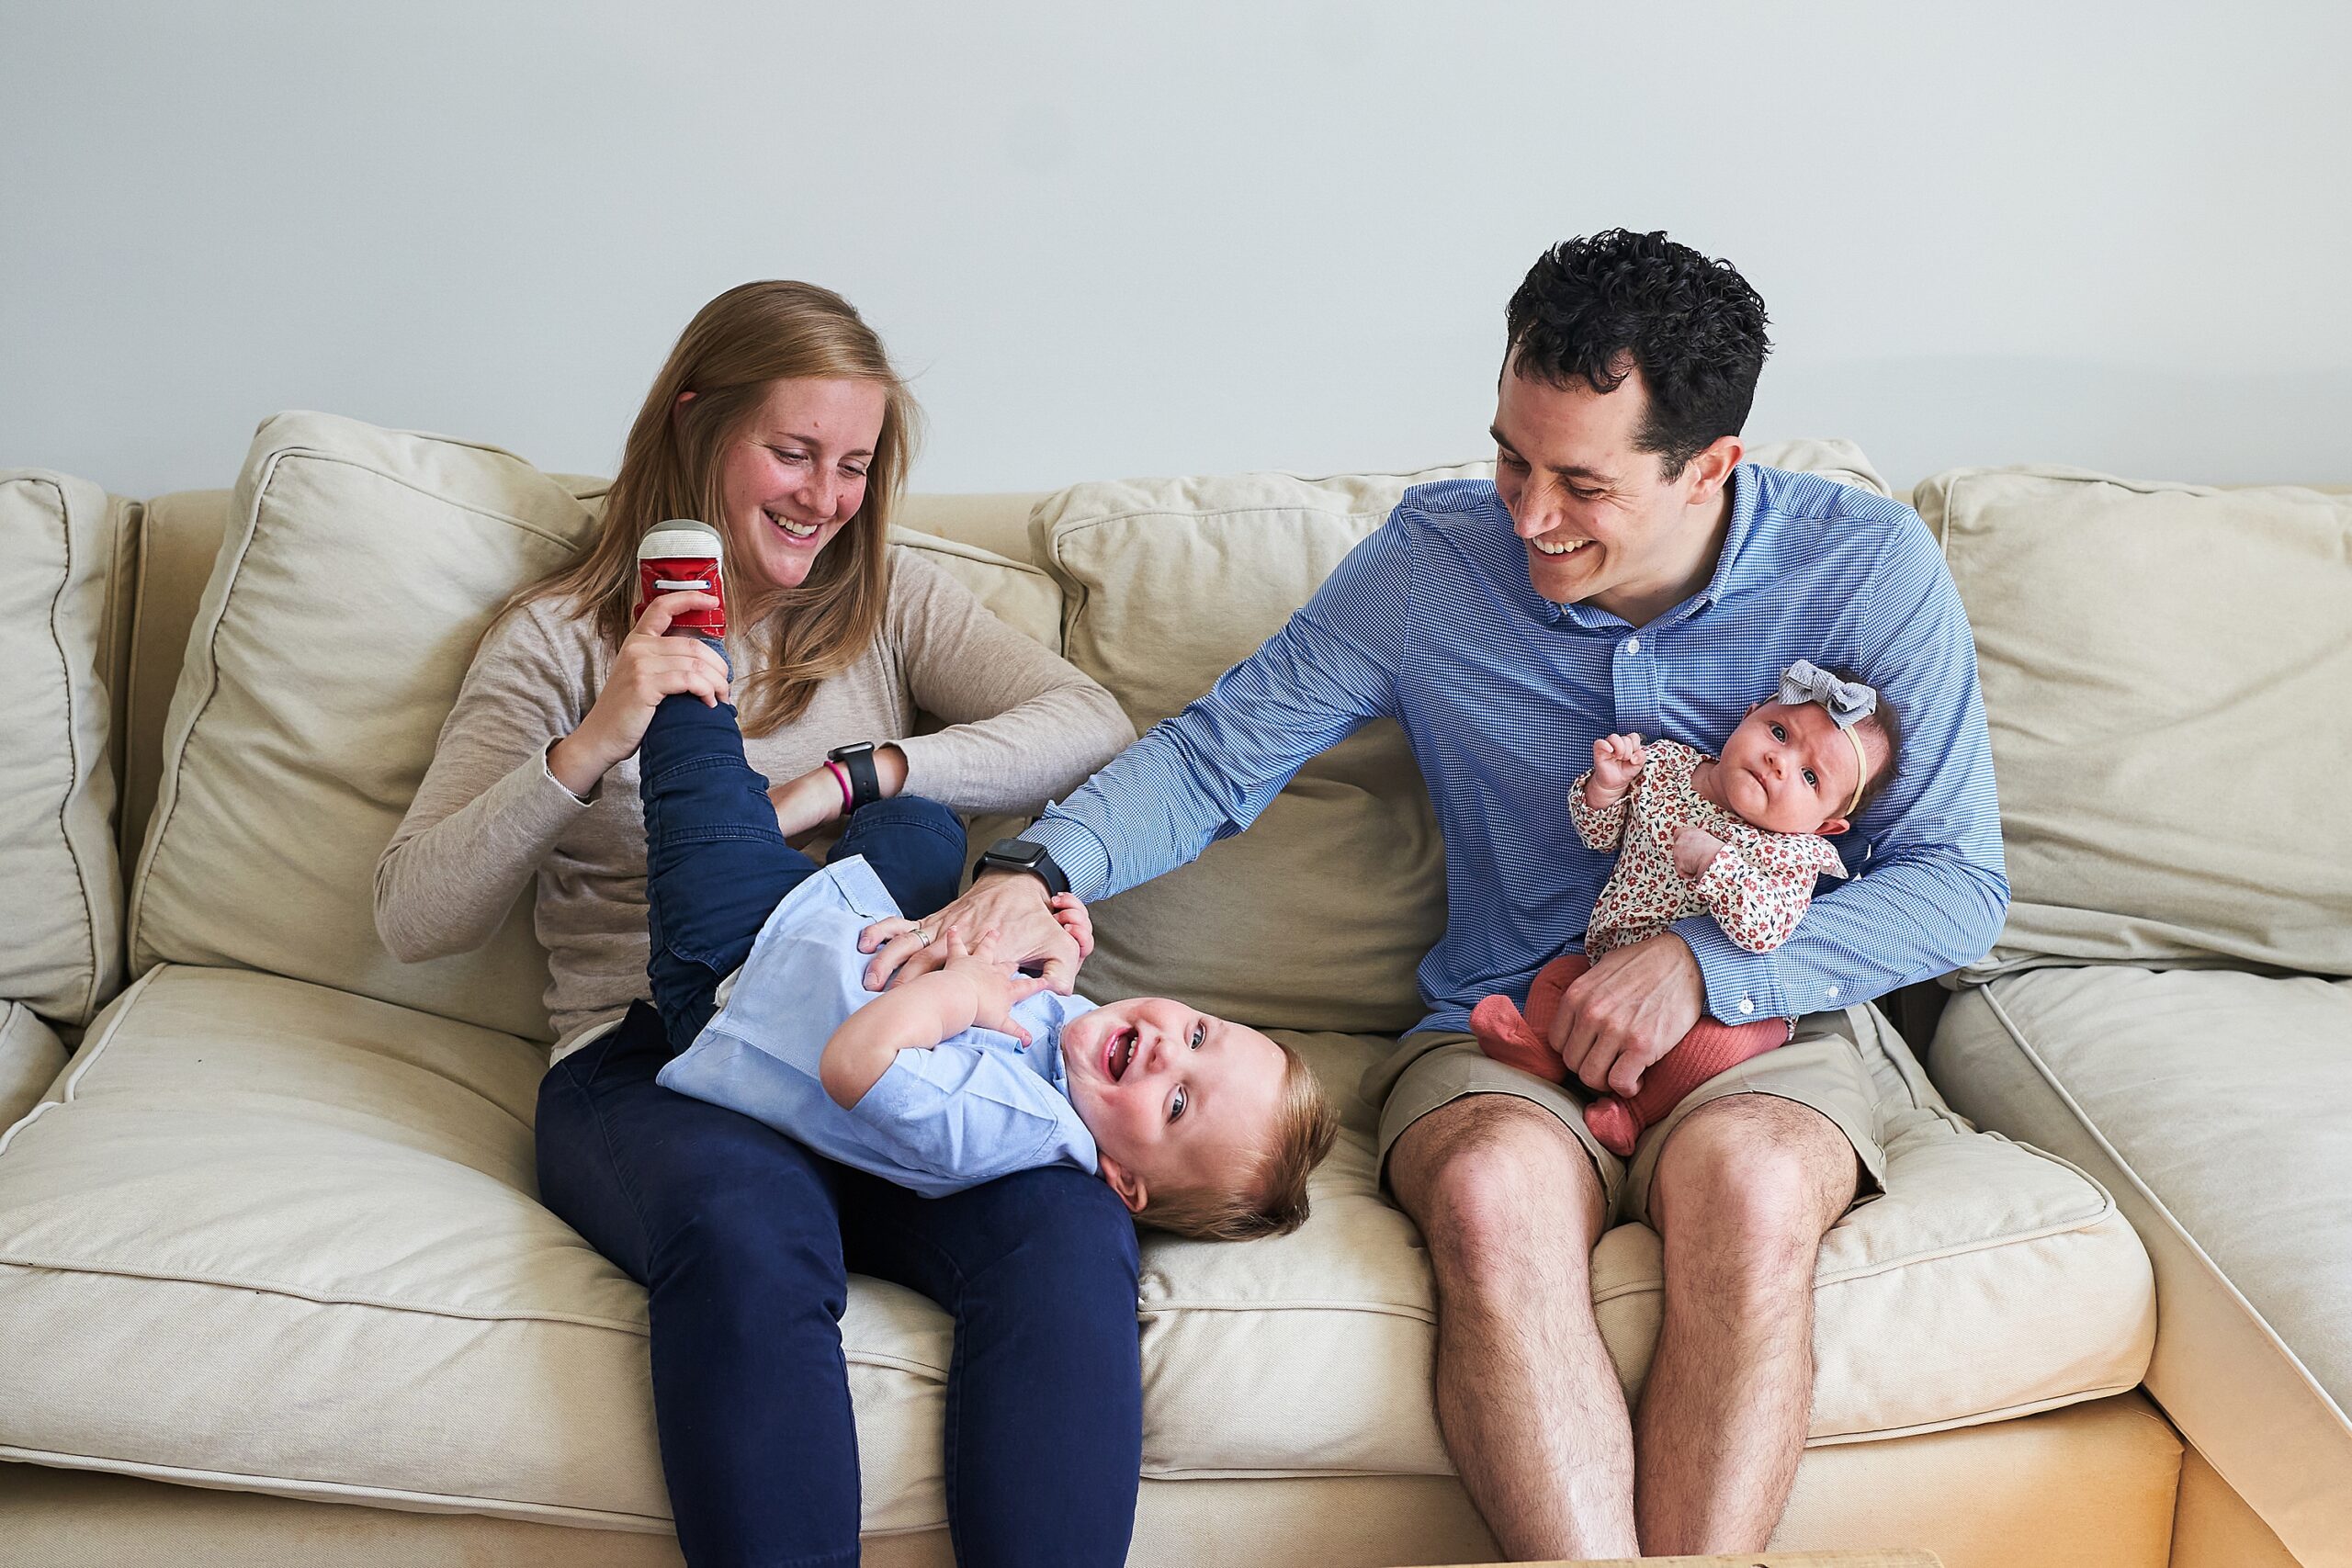 A family enjoying time together on a sofa; a mother holding a baby, a father playing with a toddler, everyone smiling.